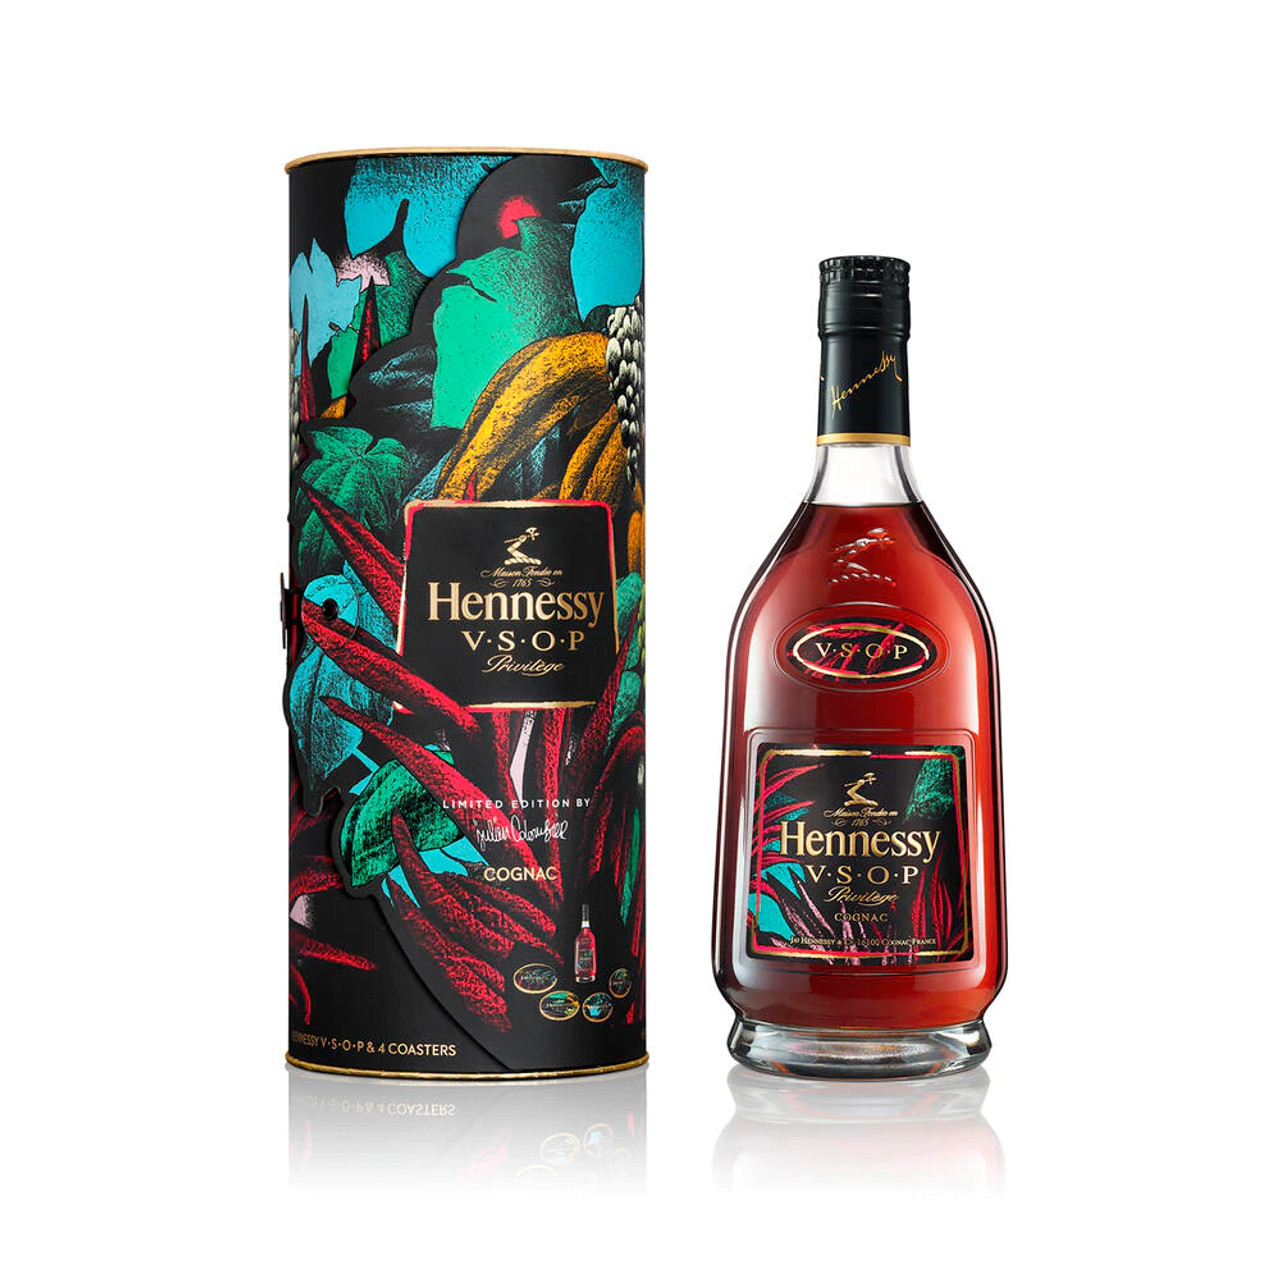 The Rich Aroma Of Hennessy Vsop A Premium Cognac For All Occasions